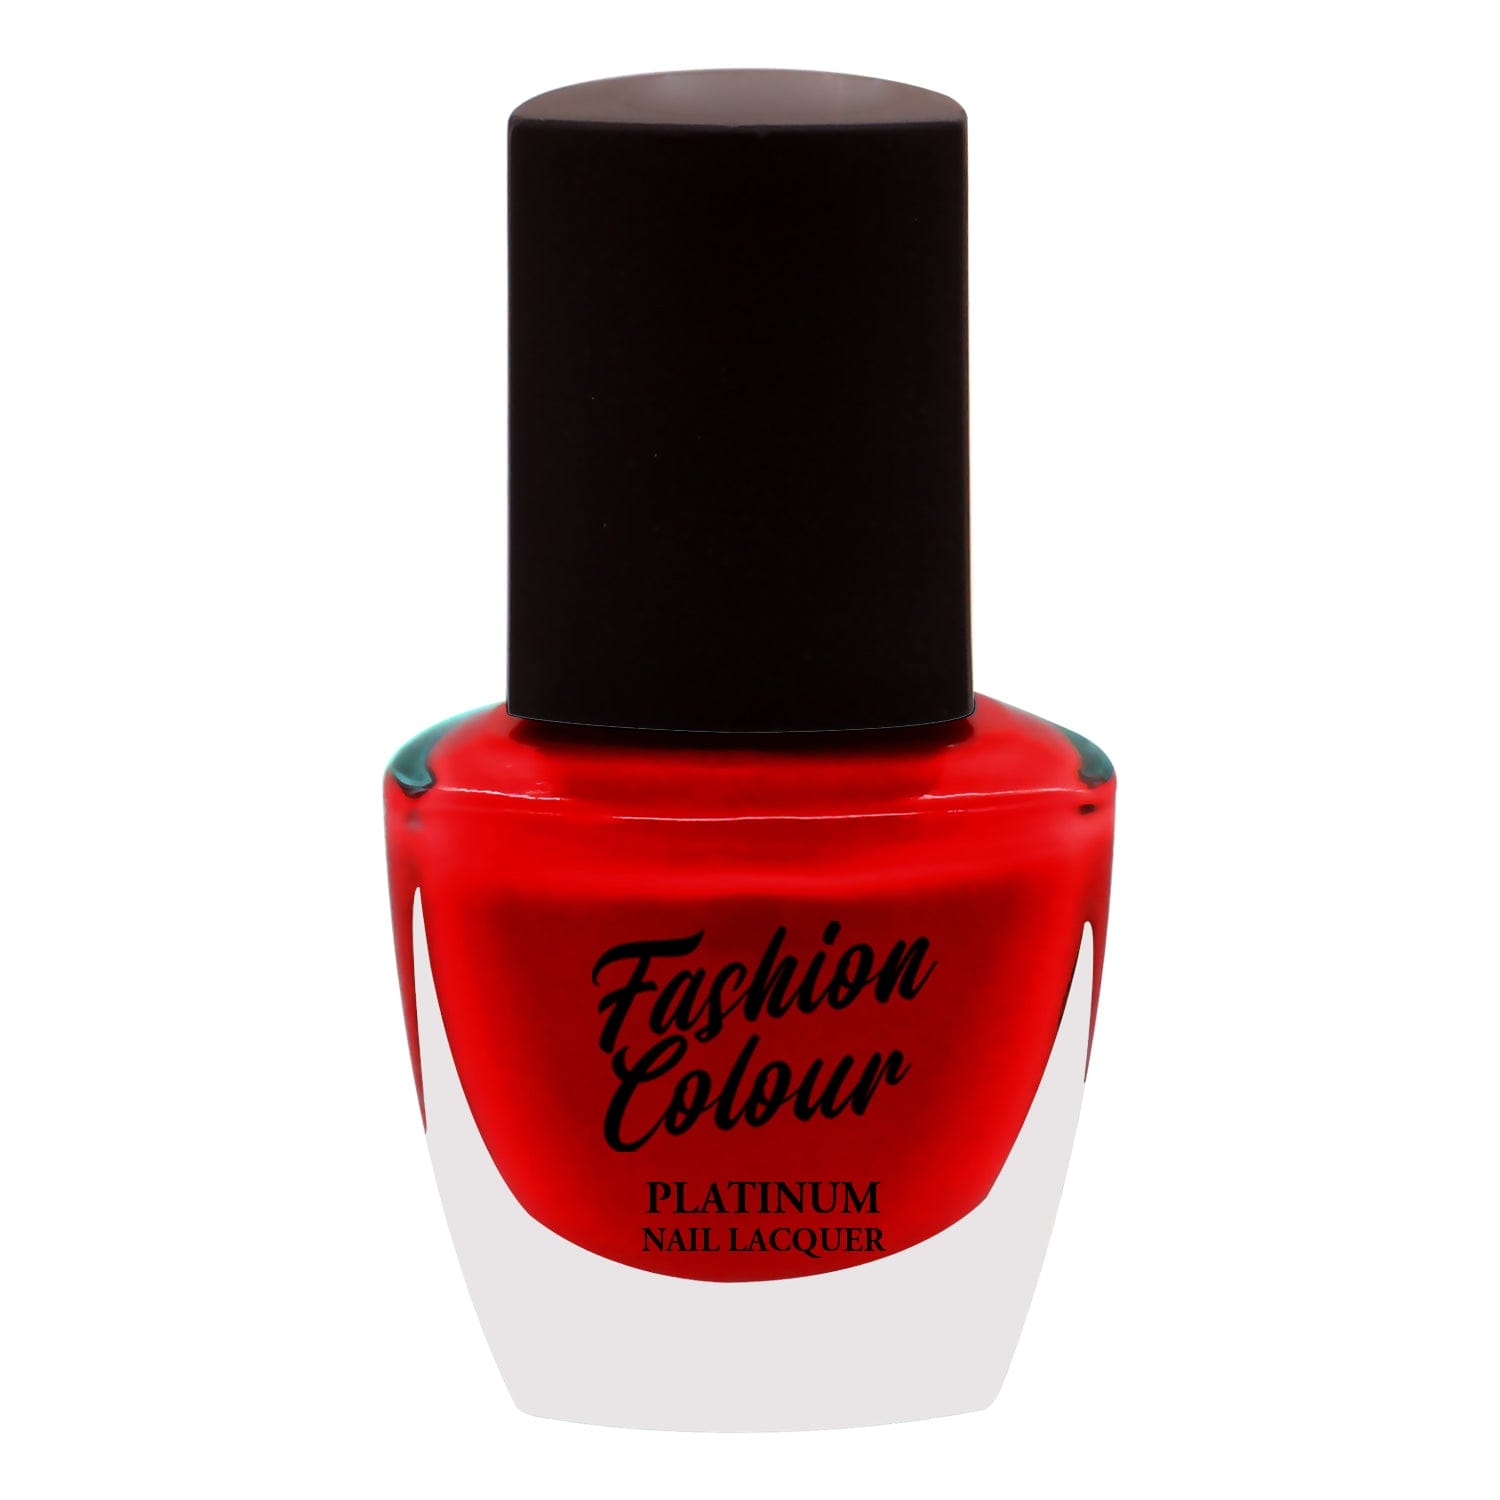 Buy Beauty without Cruelty Attitude Nail Color, Gold, 0.33 Fluid Ounce  Online at Low Prices in India - Amazon.in